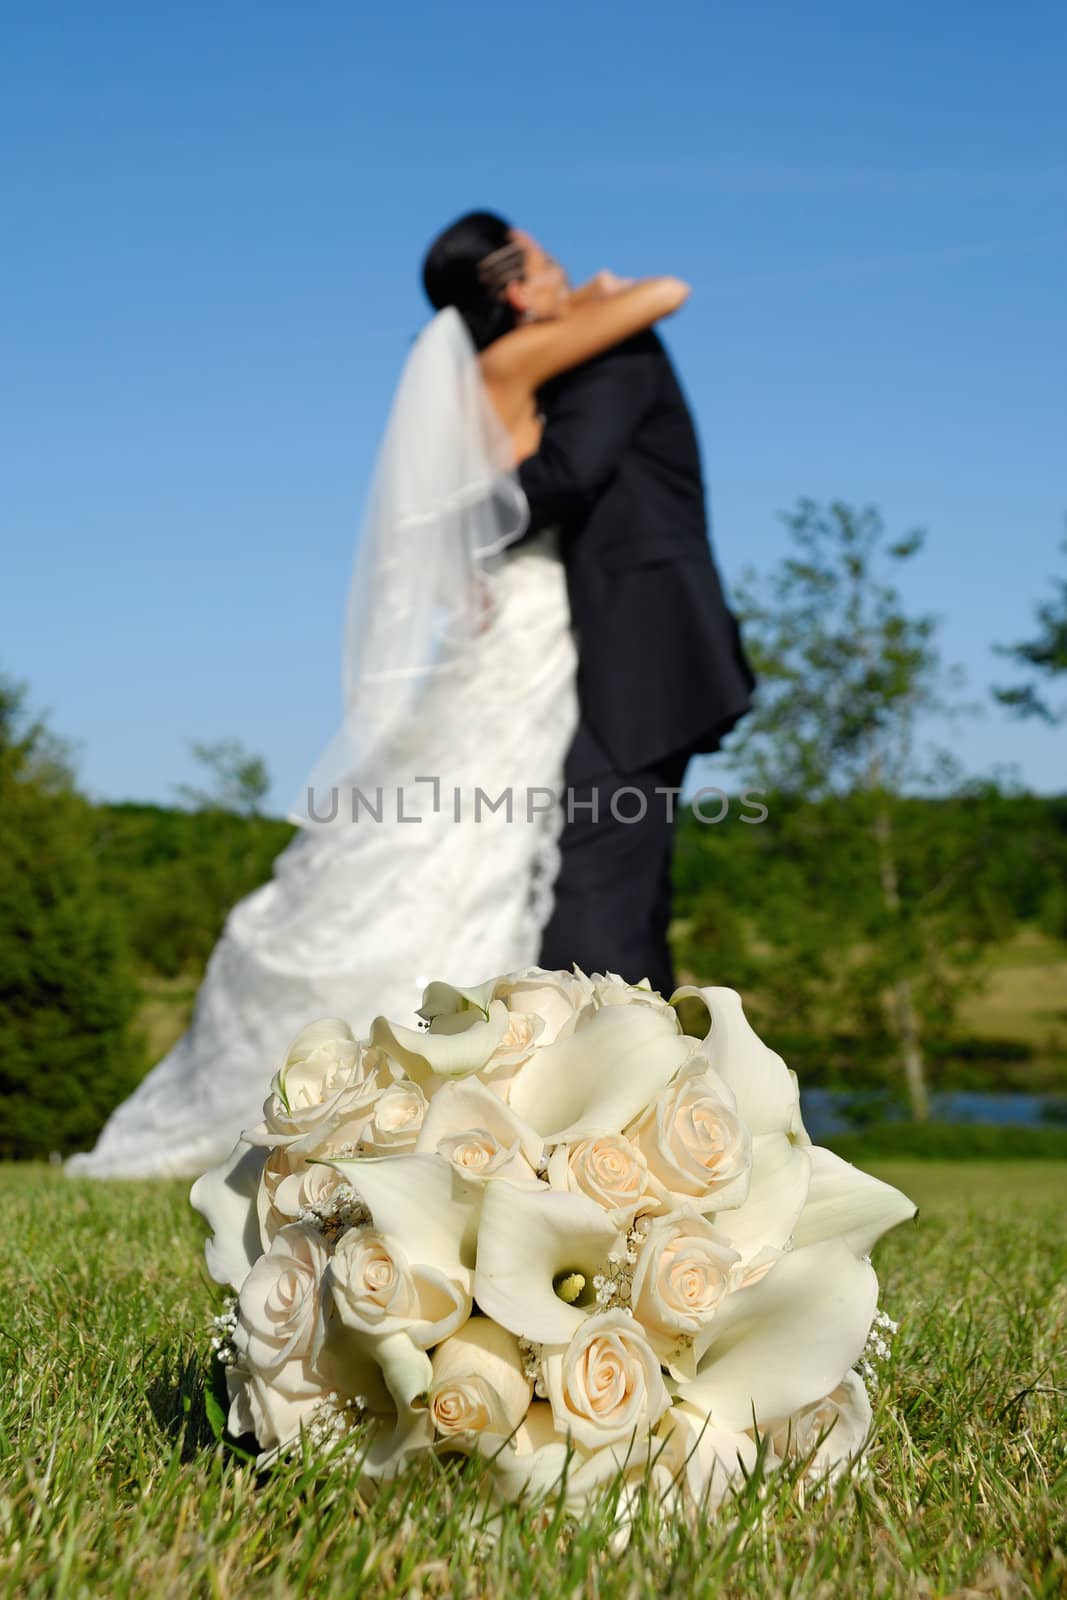 Wedding bouquet in focus and couple in the background holding each other.